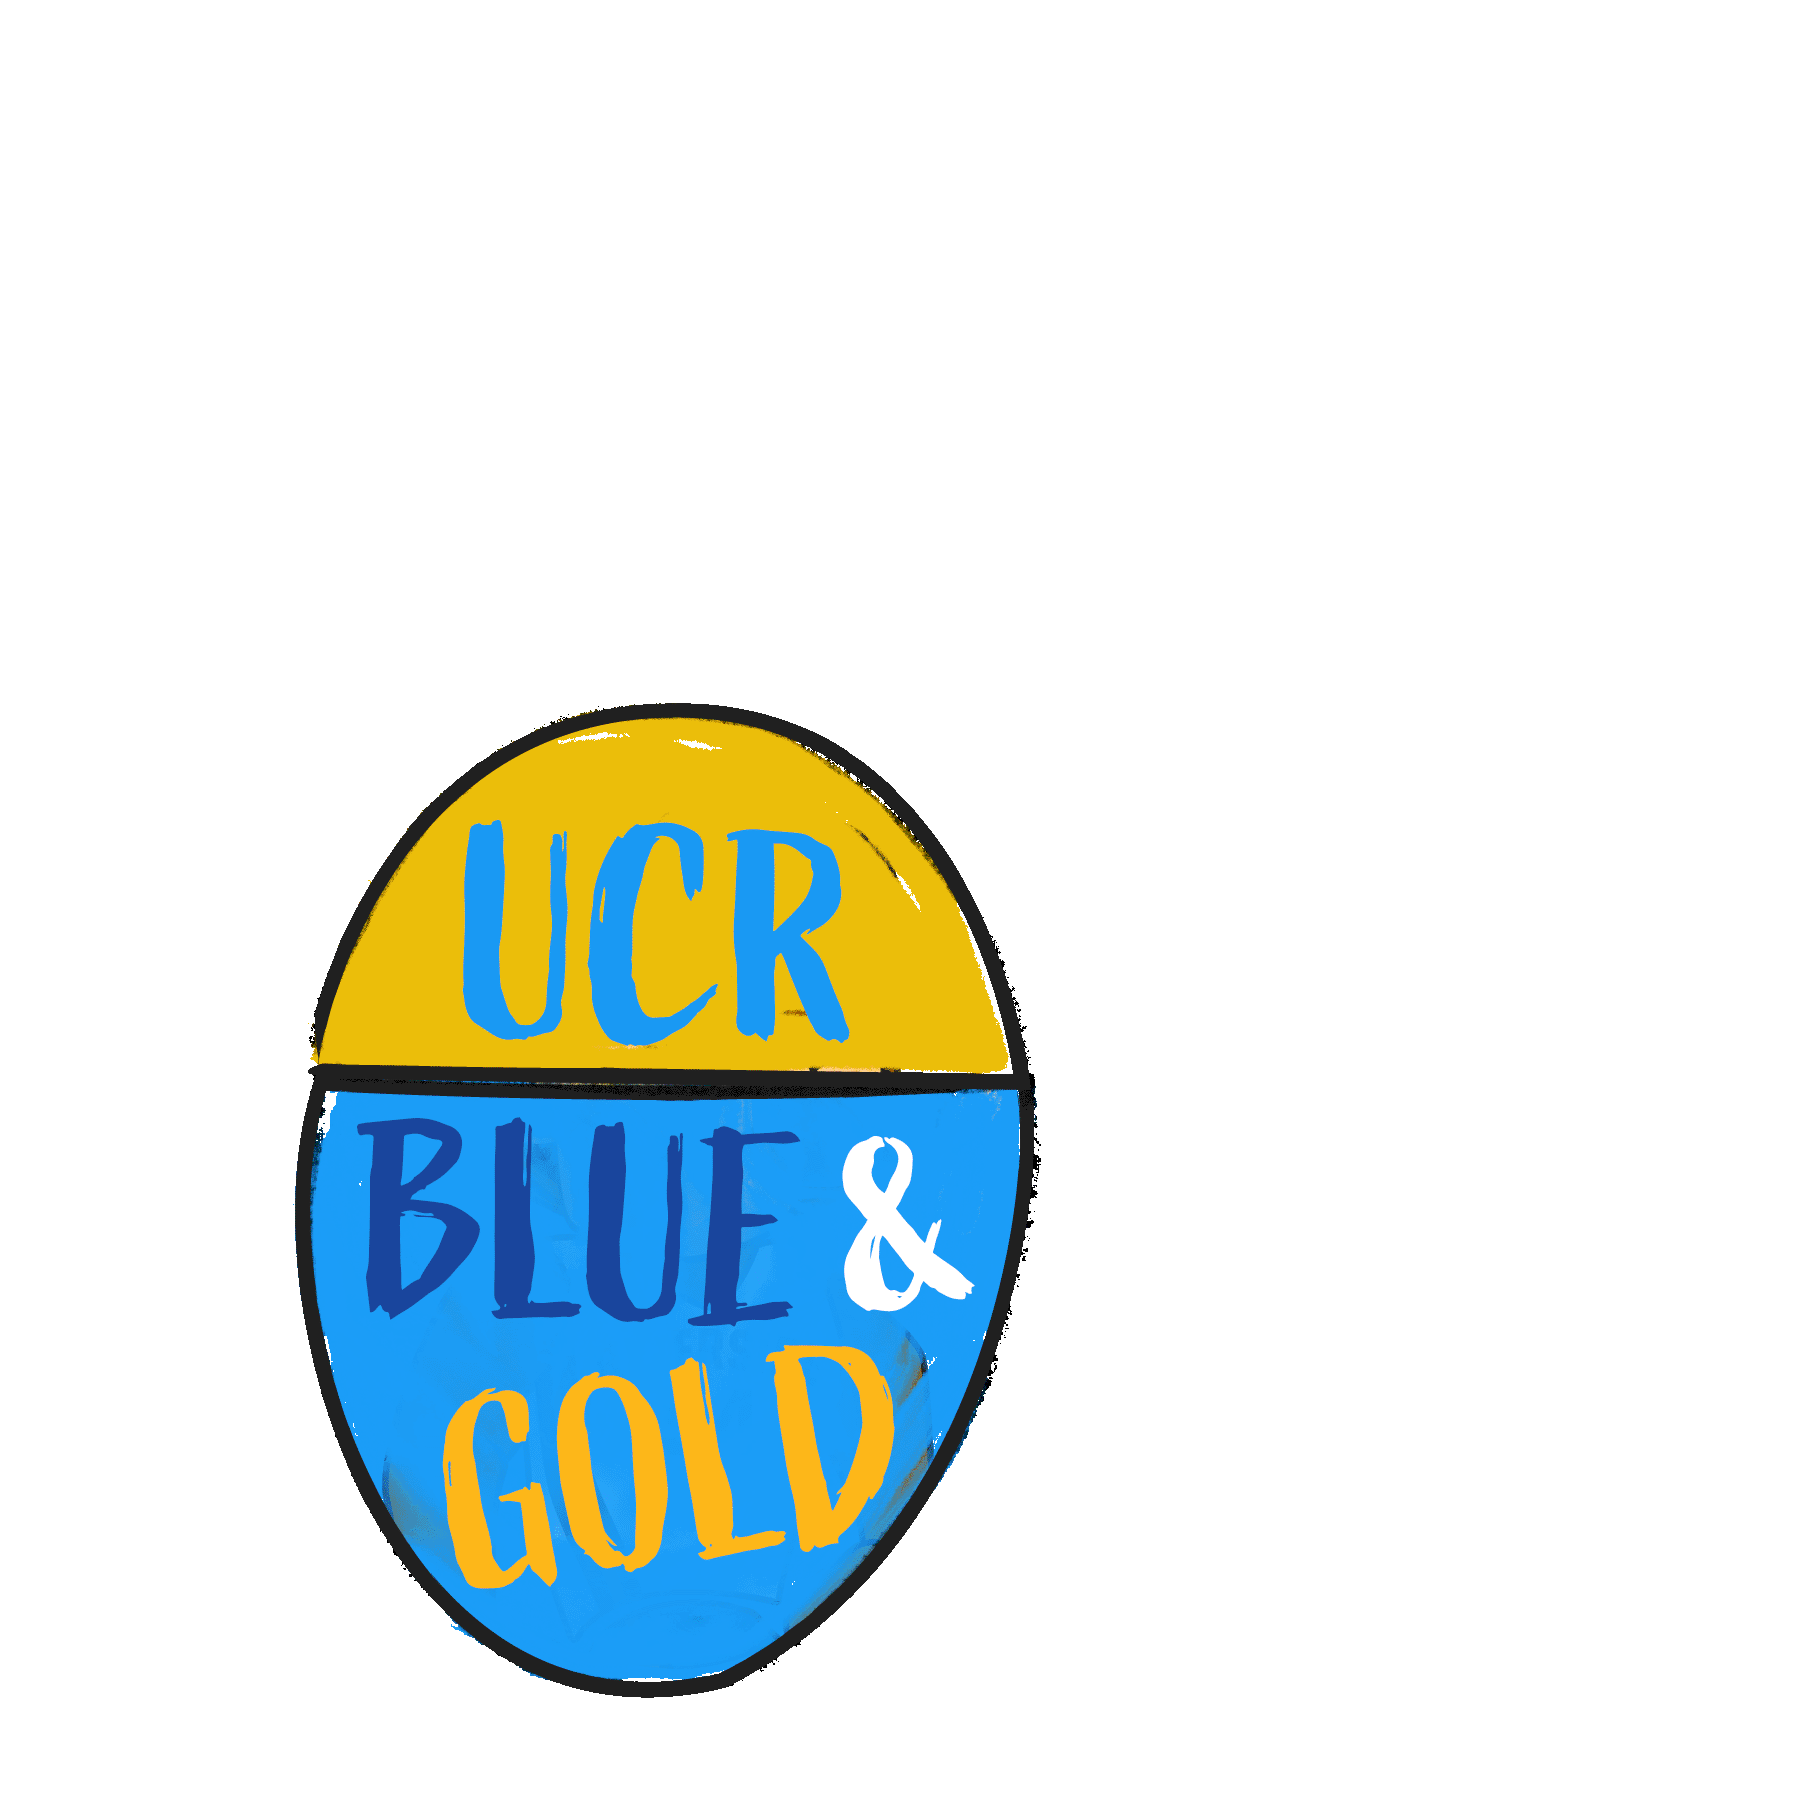 Egg-shaped "UCR Blue & Gold" animated GIF with Scotty.